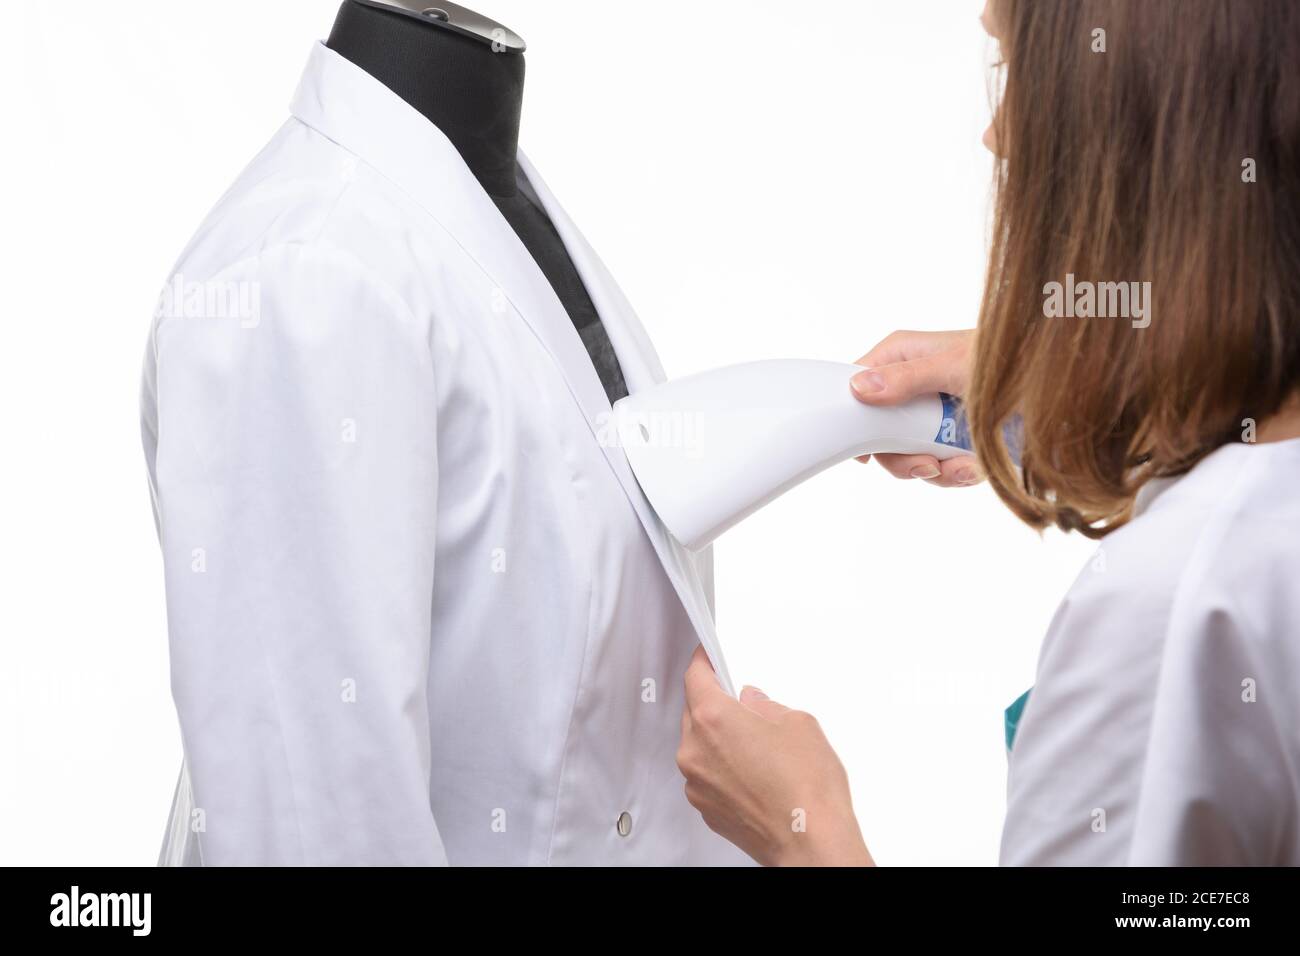 Girl handles medical clothing by steamer on a white background Stock Photo